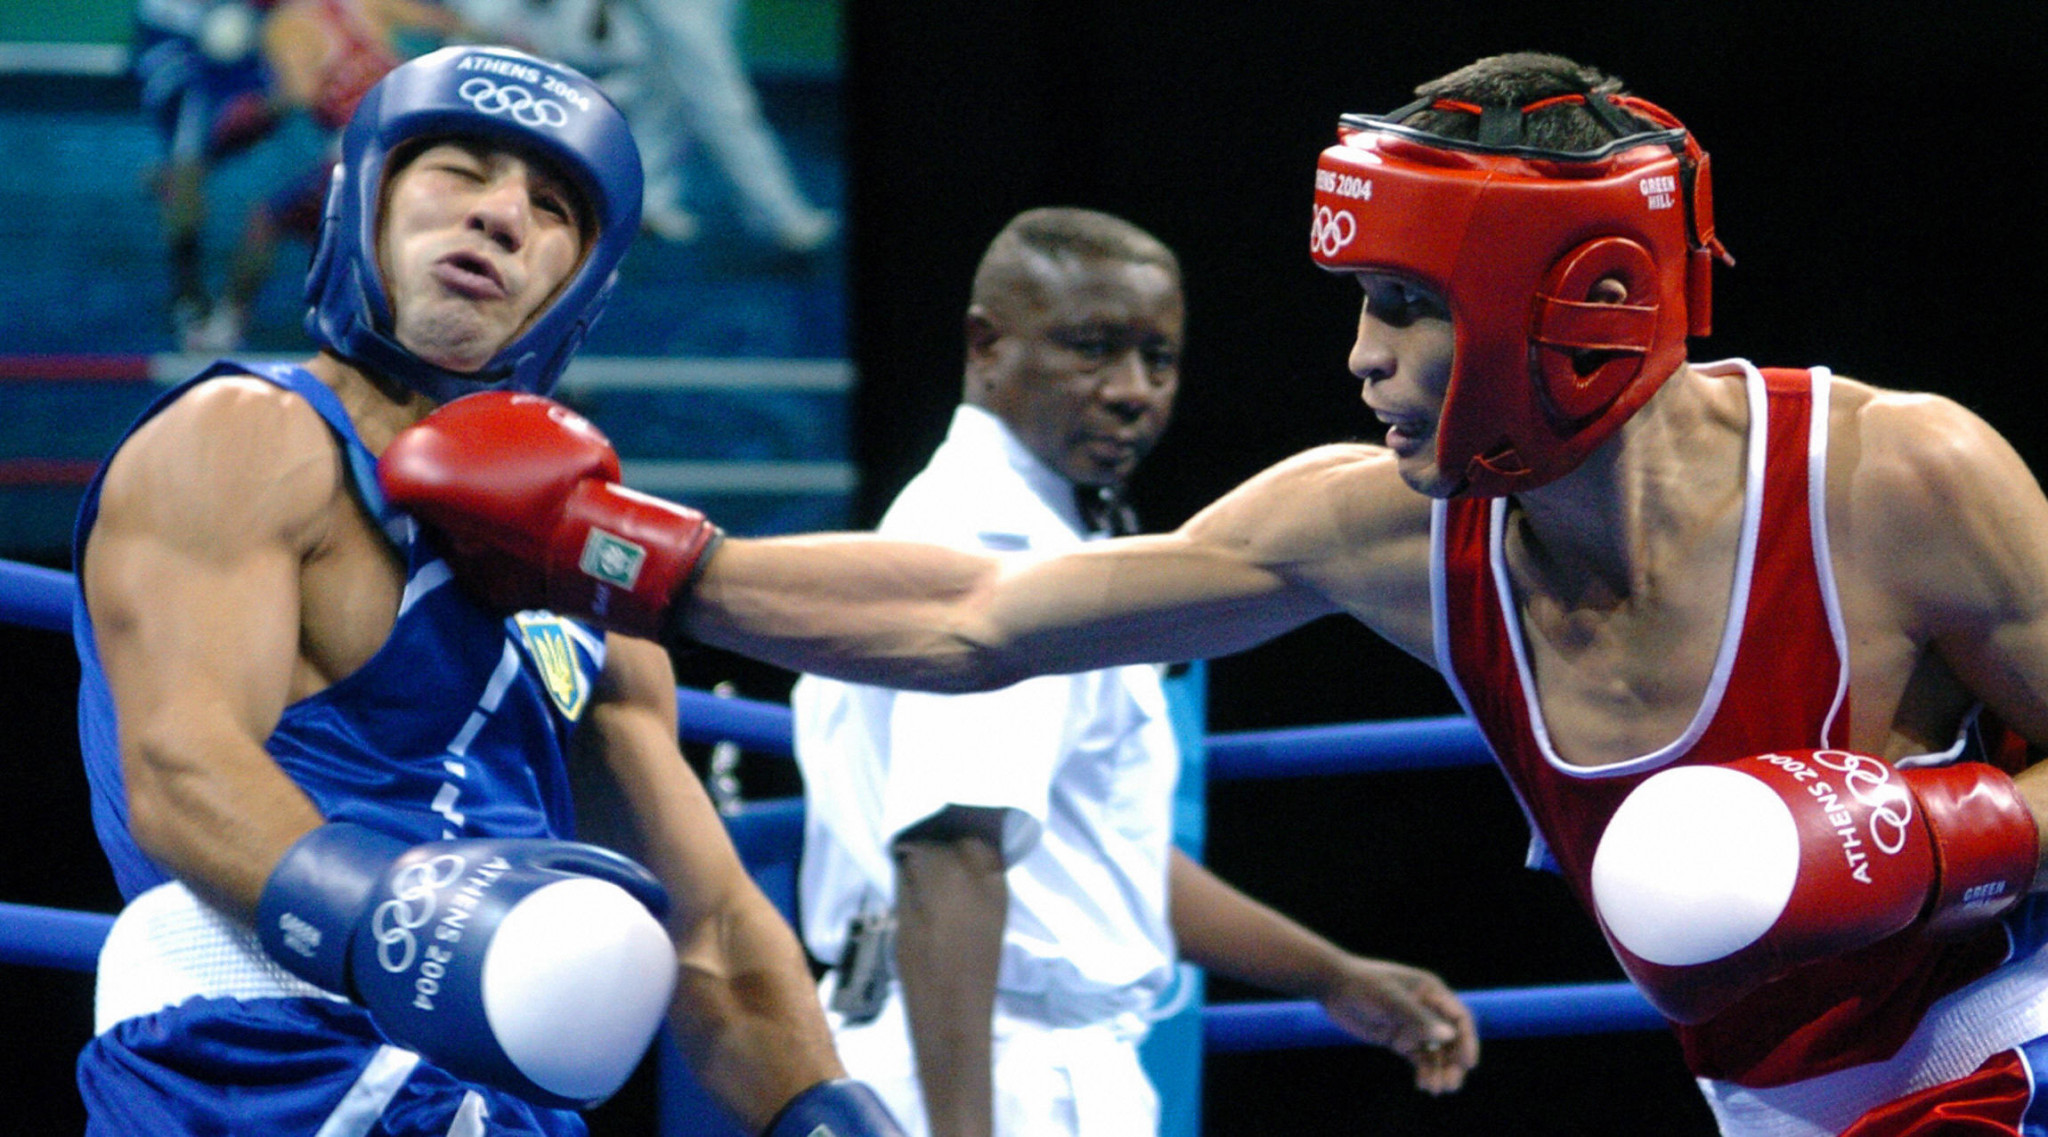 Pakistan was last represented at the Olympics in boxing at Athens 2004, including Asghar Ali Shah, right ©Getty Images